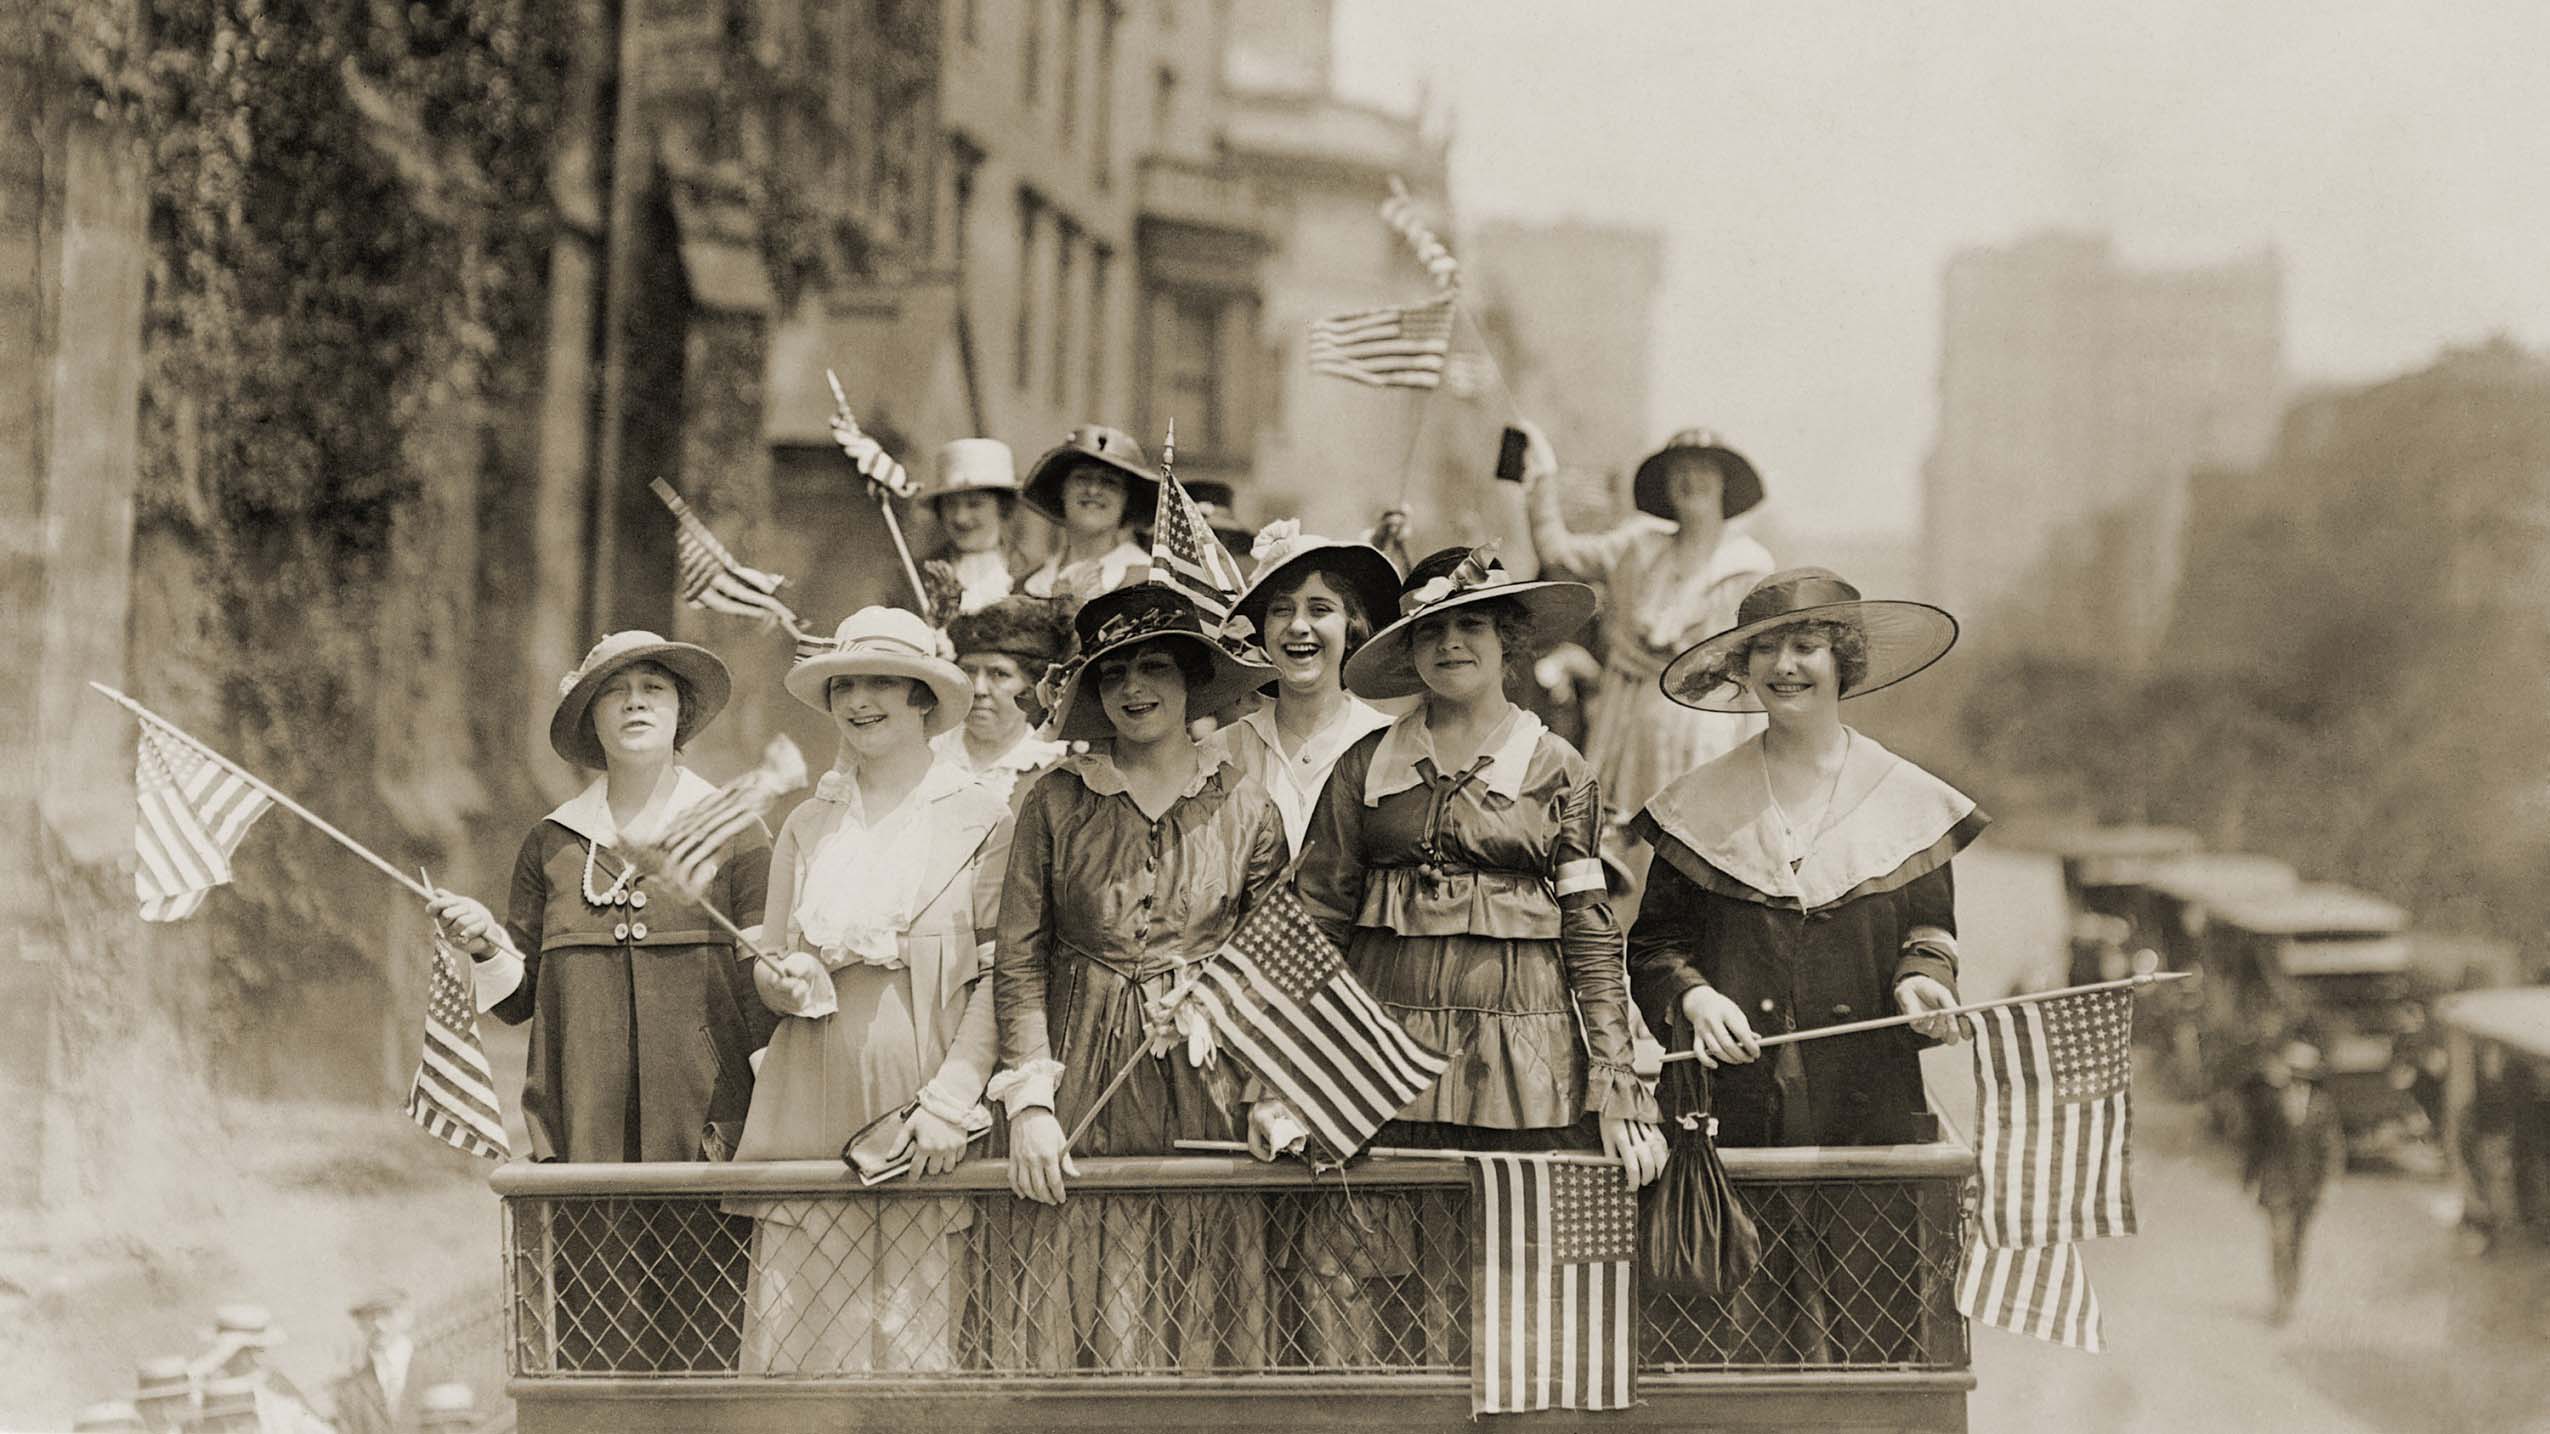 Women Empowered: Suffragettes to Today